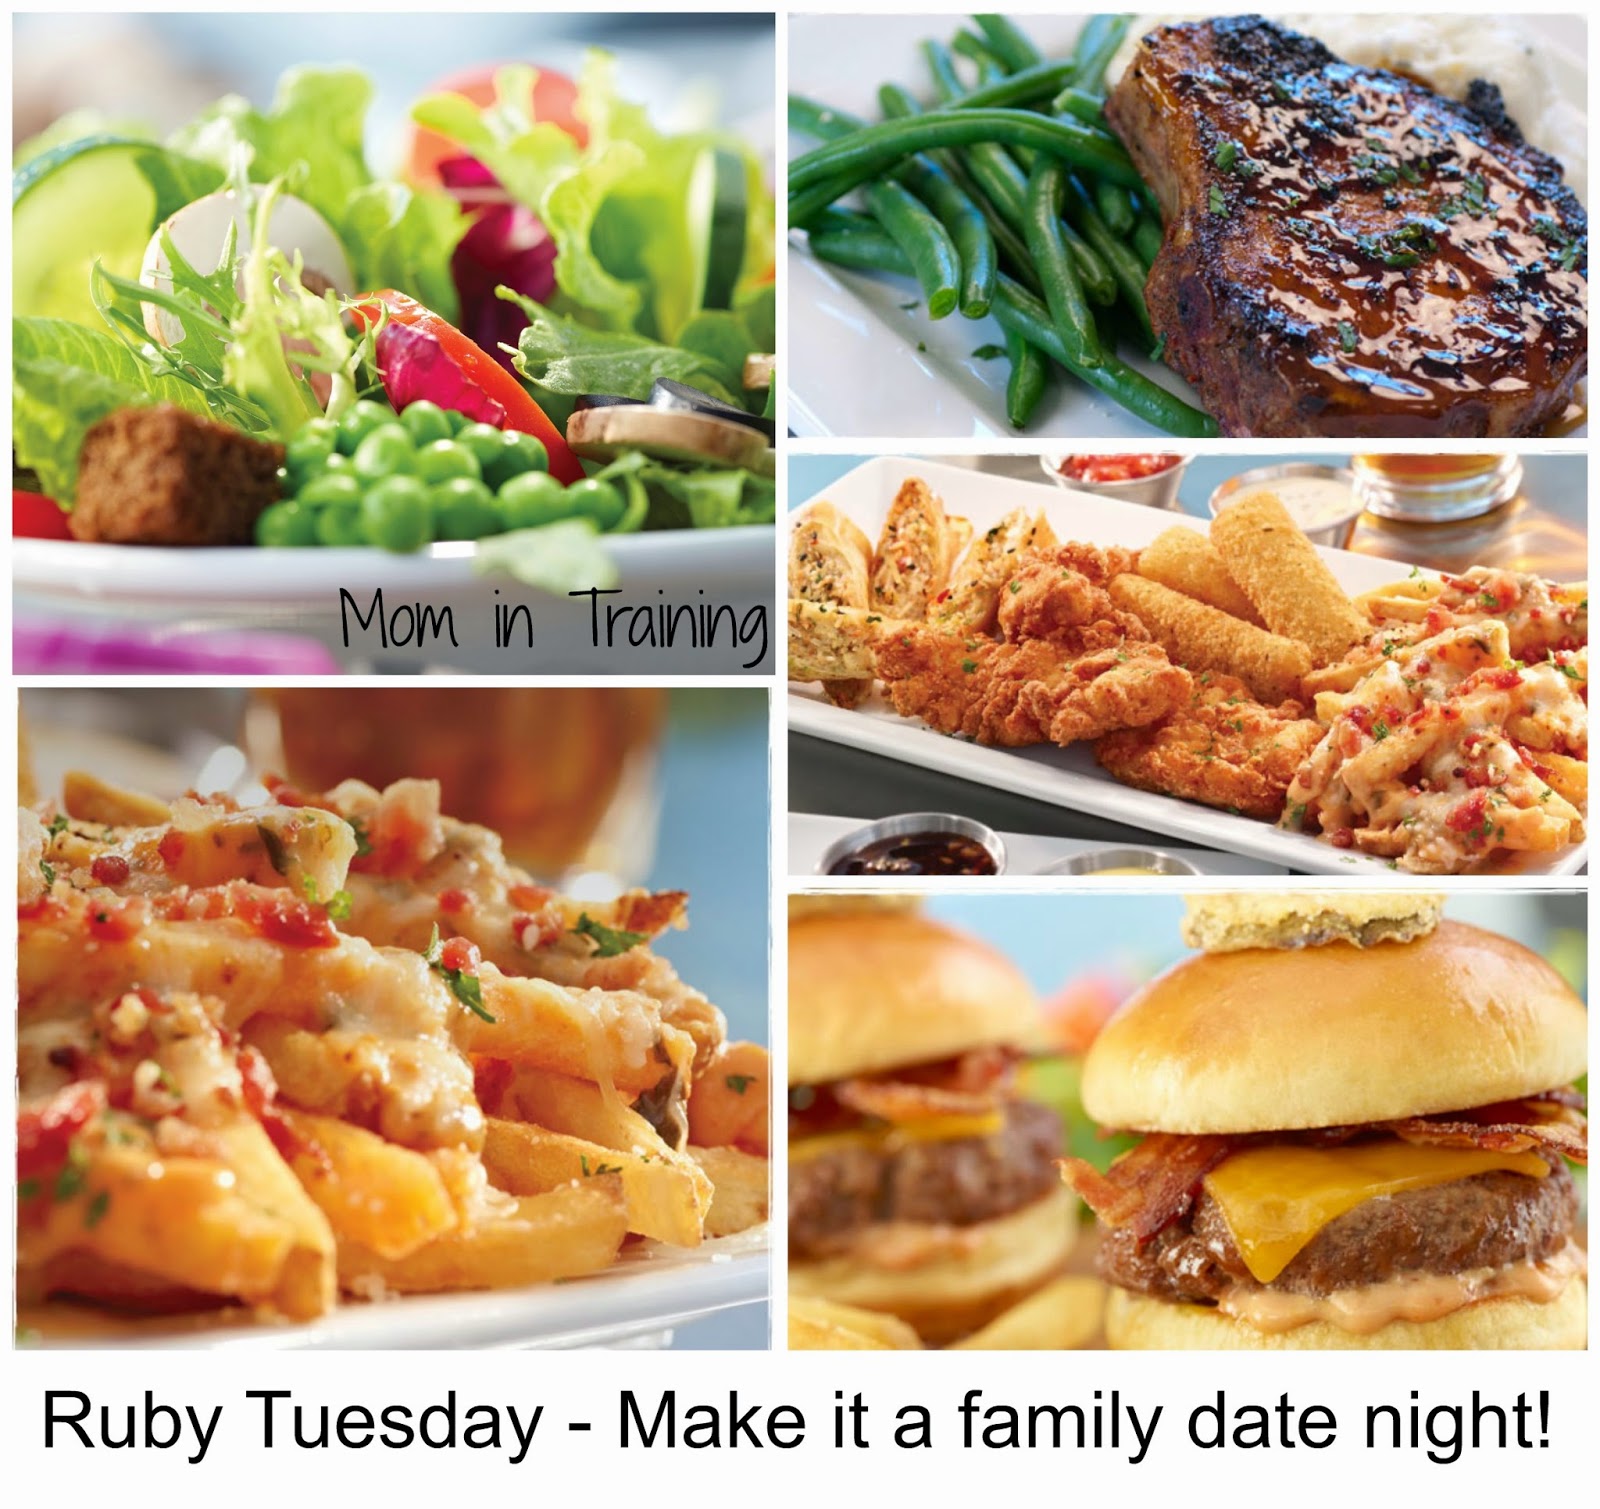 It's been awhile since we last had dinner out at Ruby Tuesday, but I d...